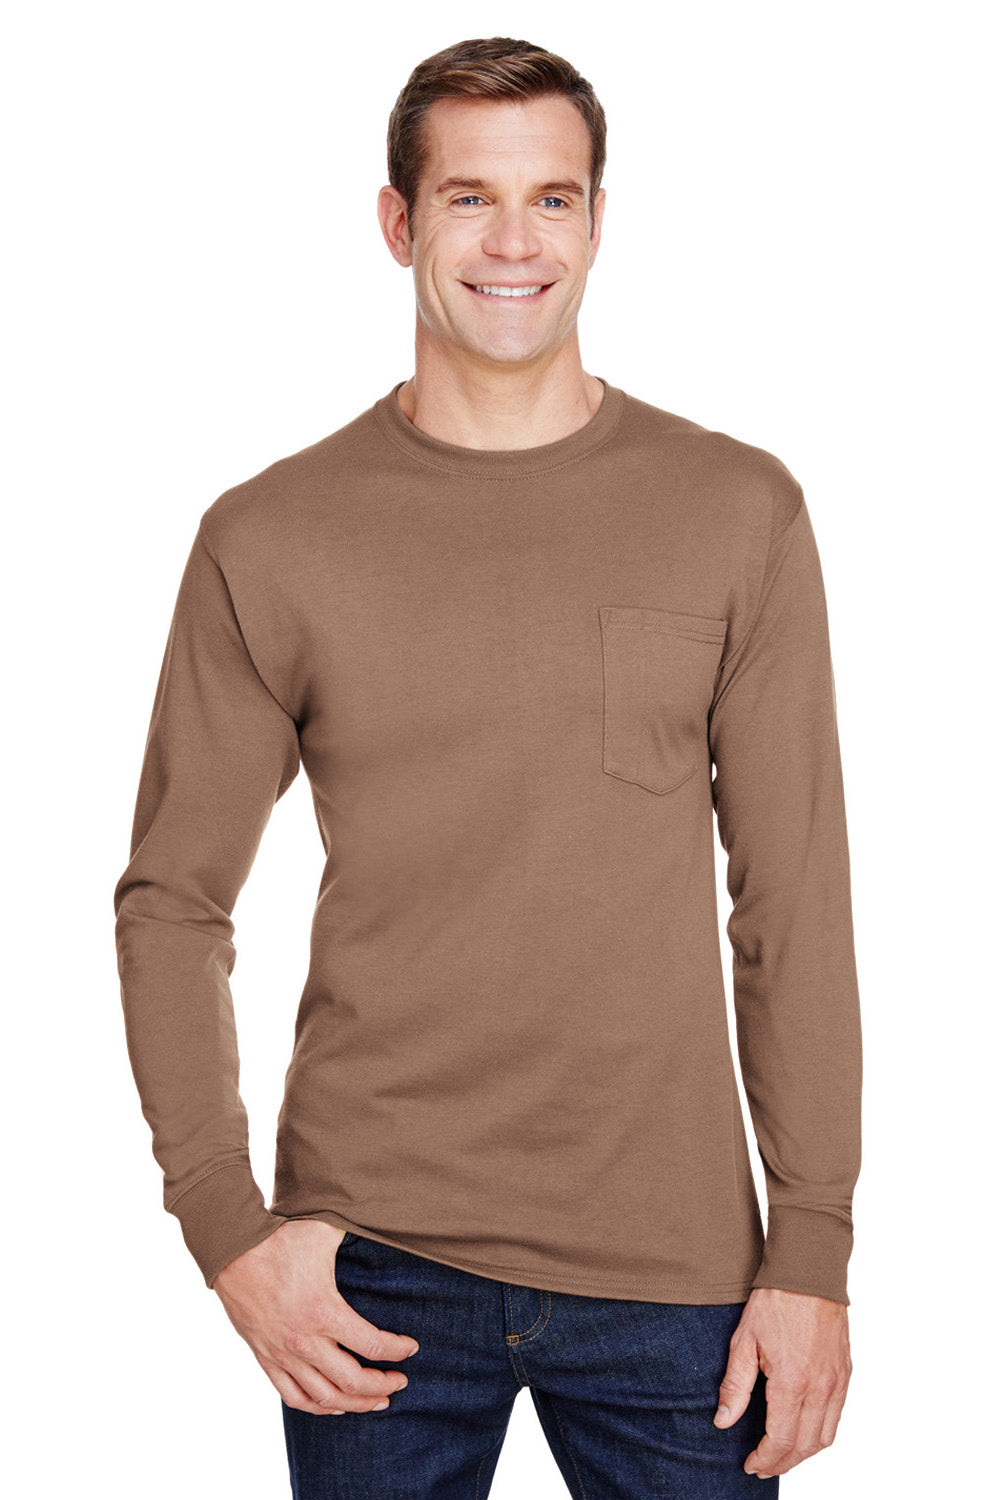 Hanes W120 Mens Workwear Long Sleeve Crewneck T-Shirt w/ Pocket Army Brown Front